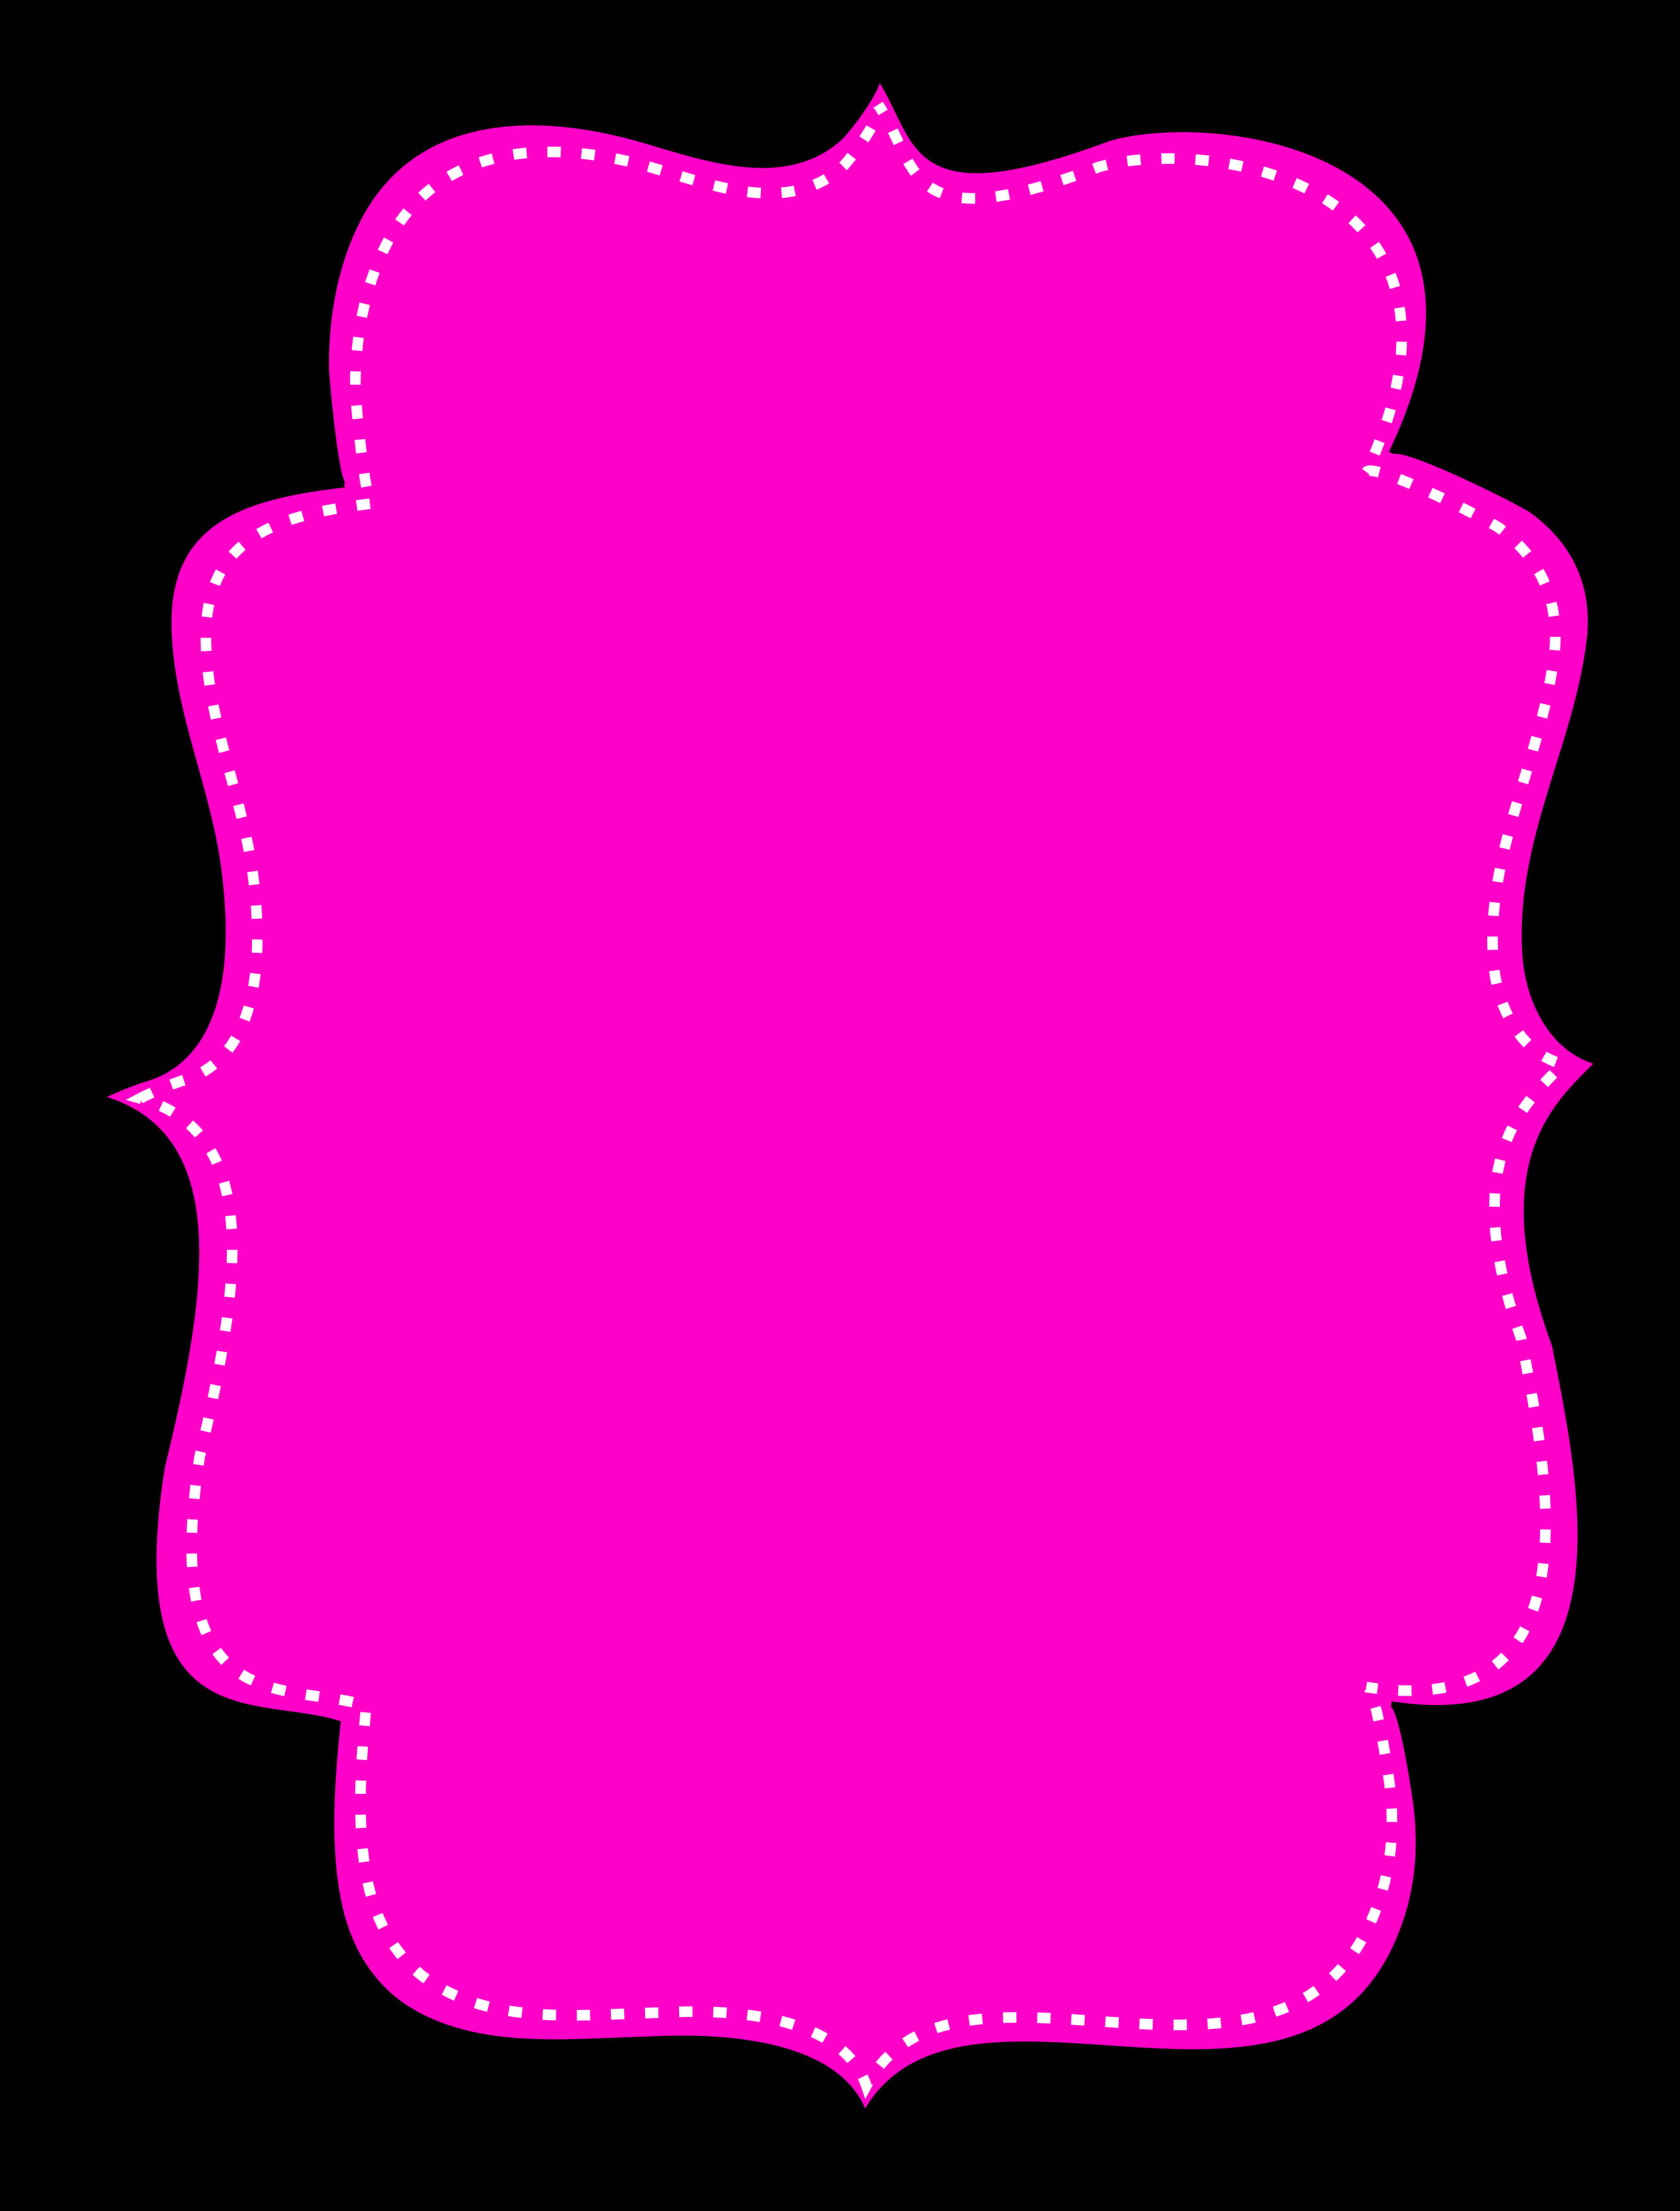 A Pink Frame With White Dots